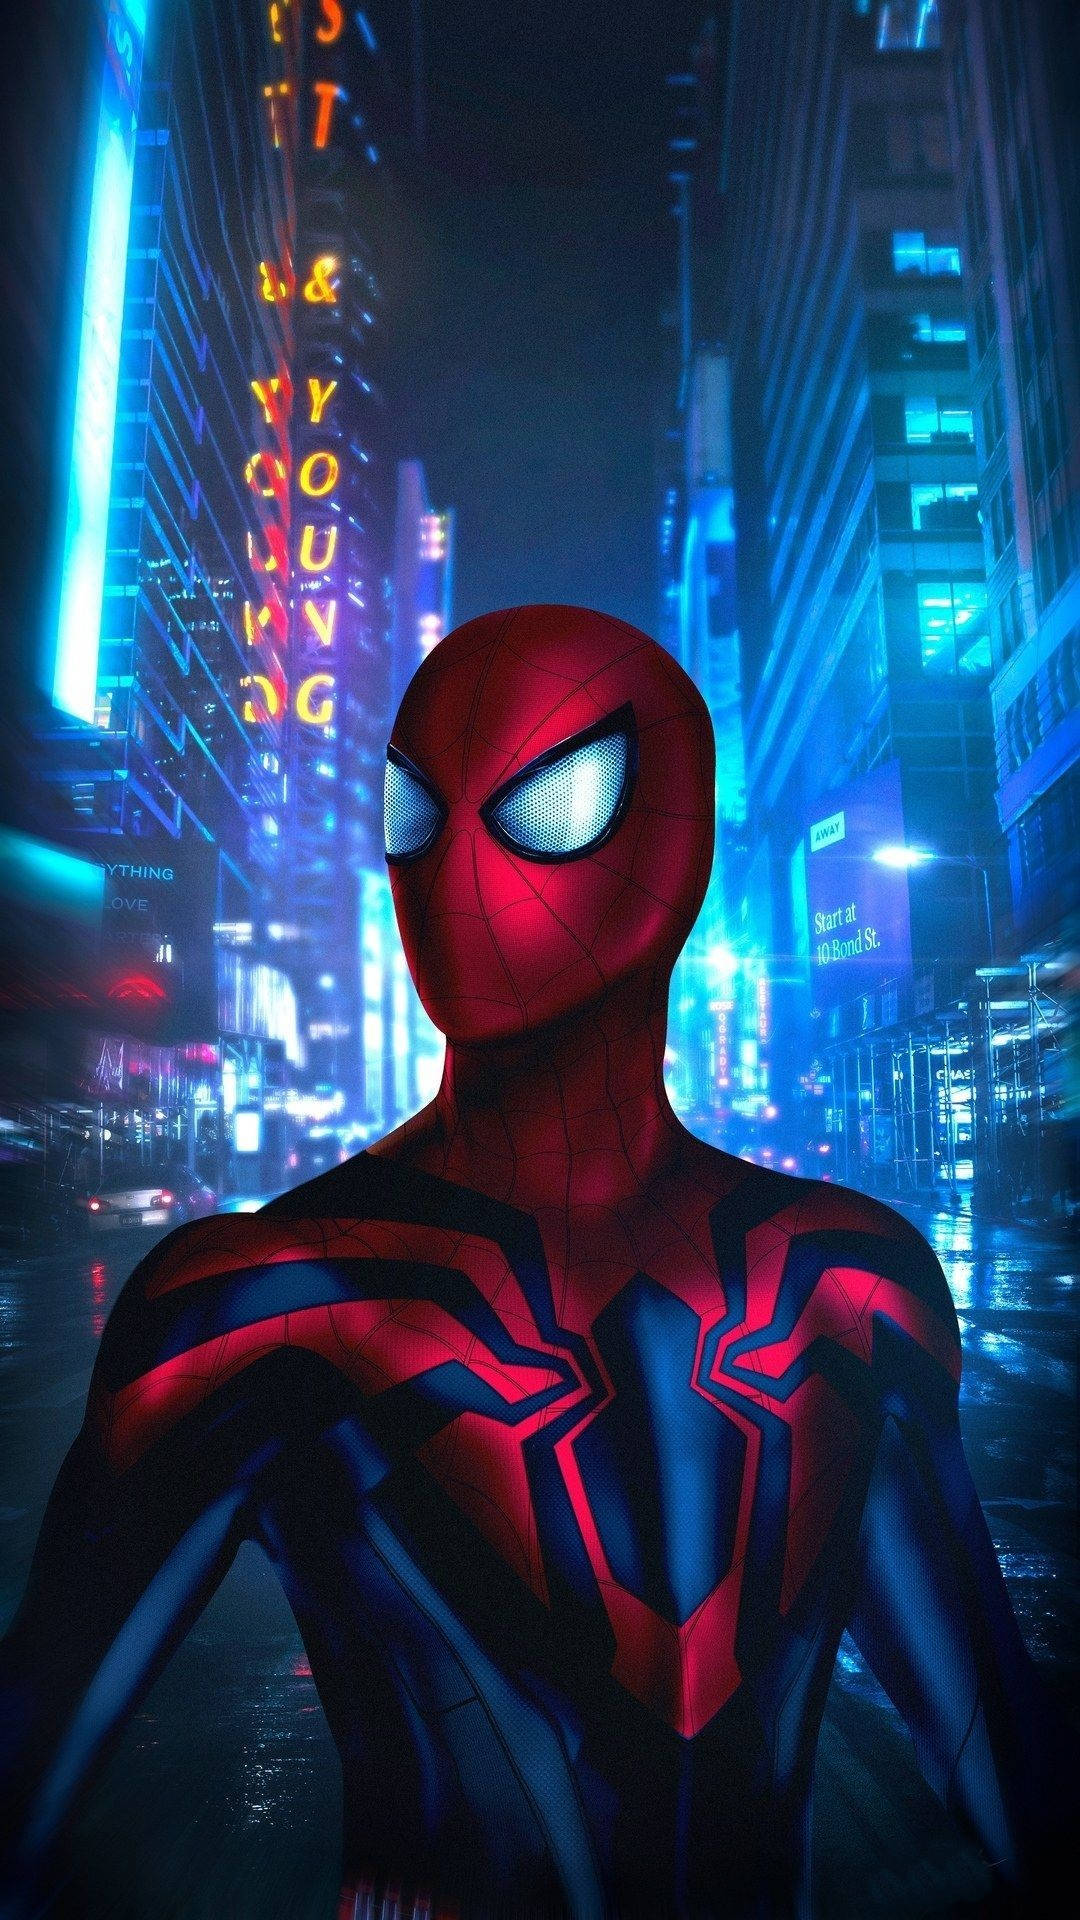 Caption: Exciting Spiderman Wallpaper For Oneplus 8 Pro Users Background